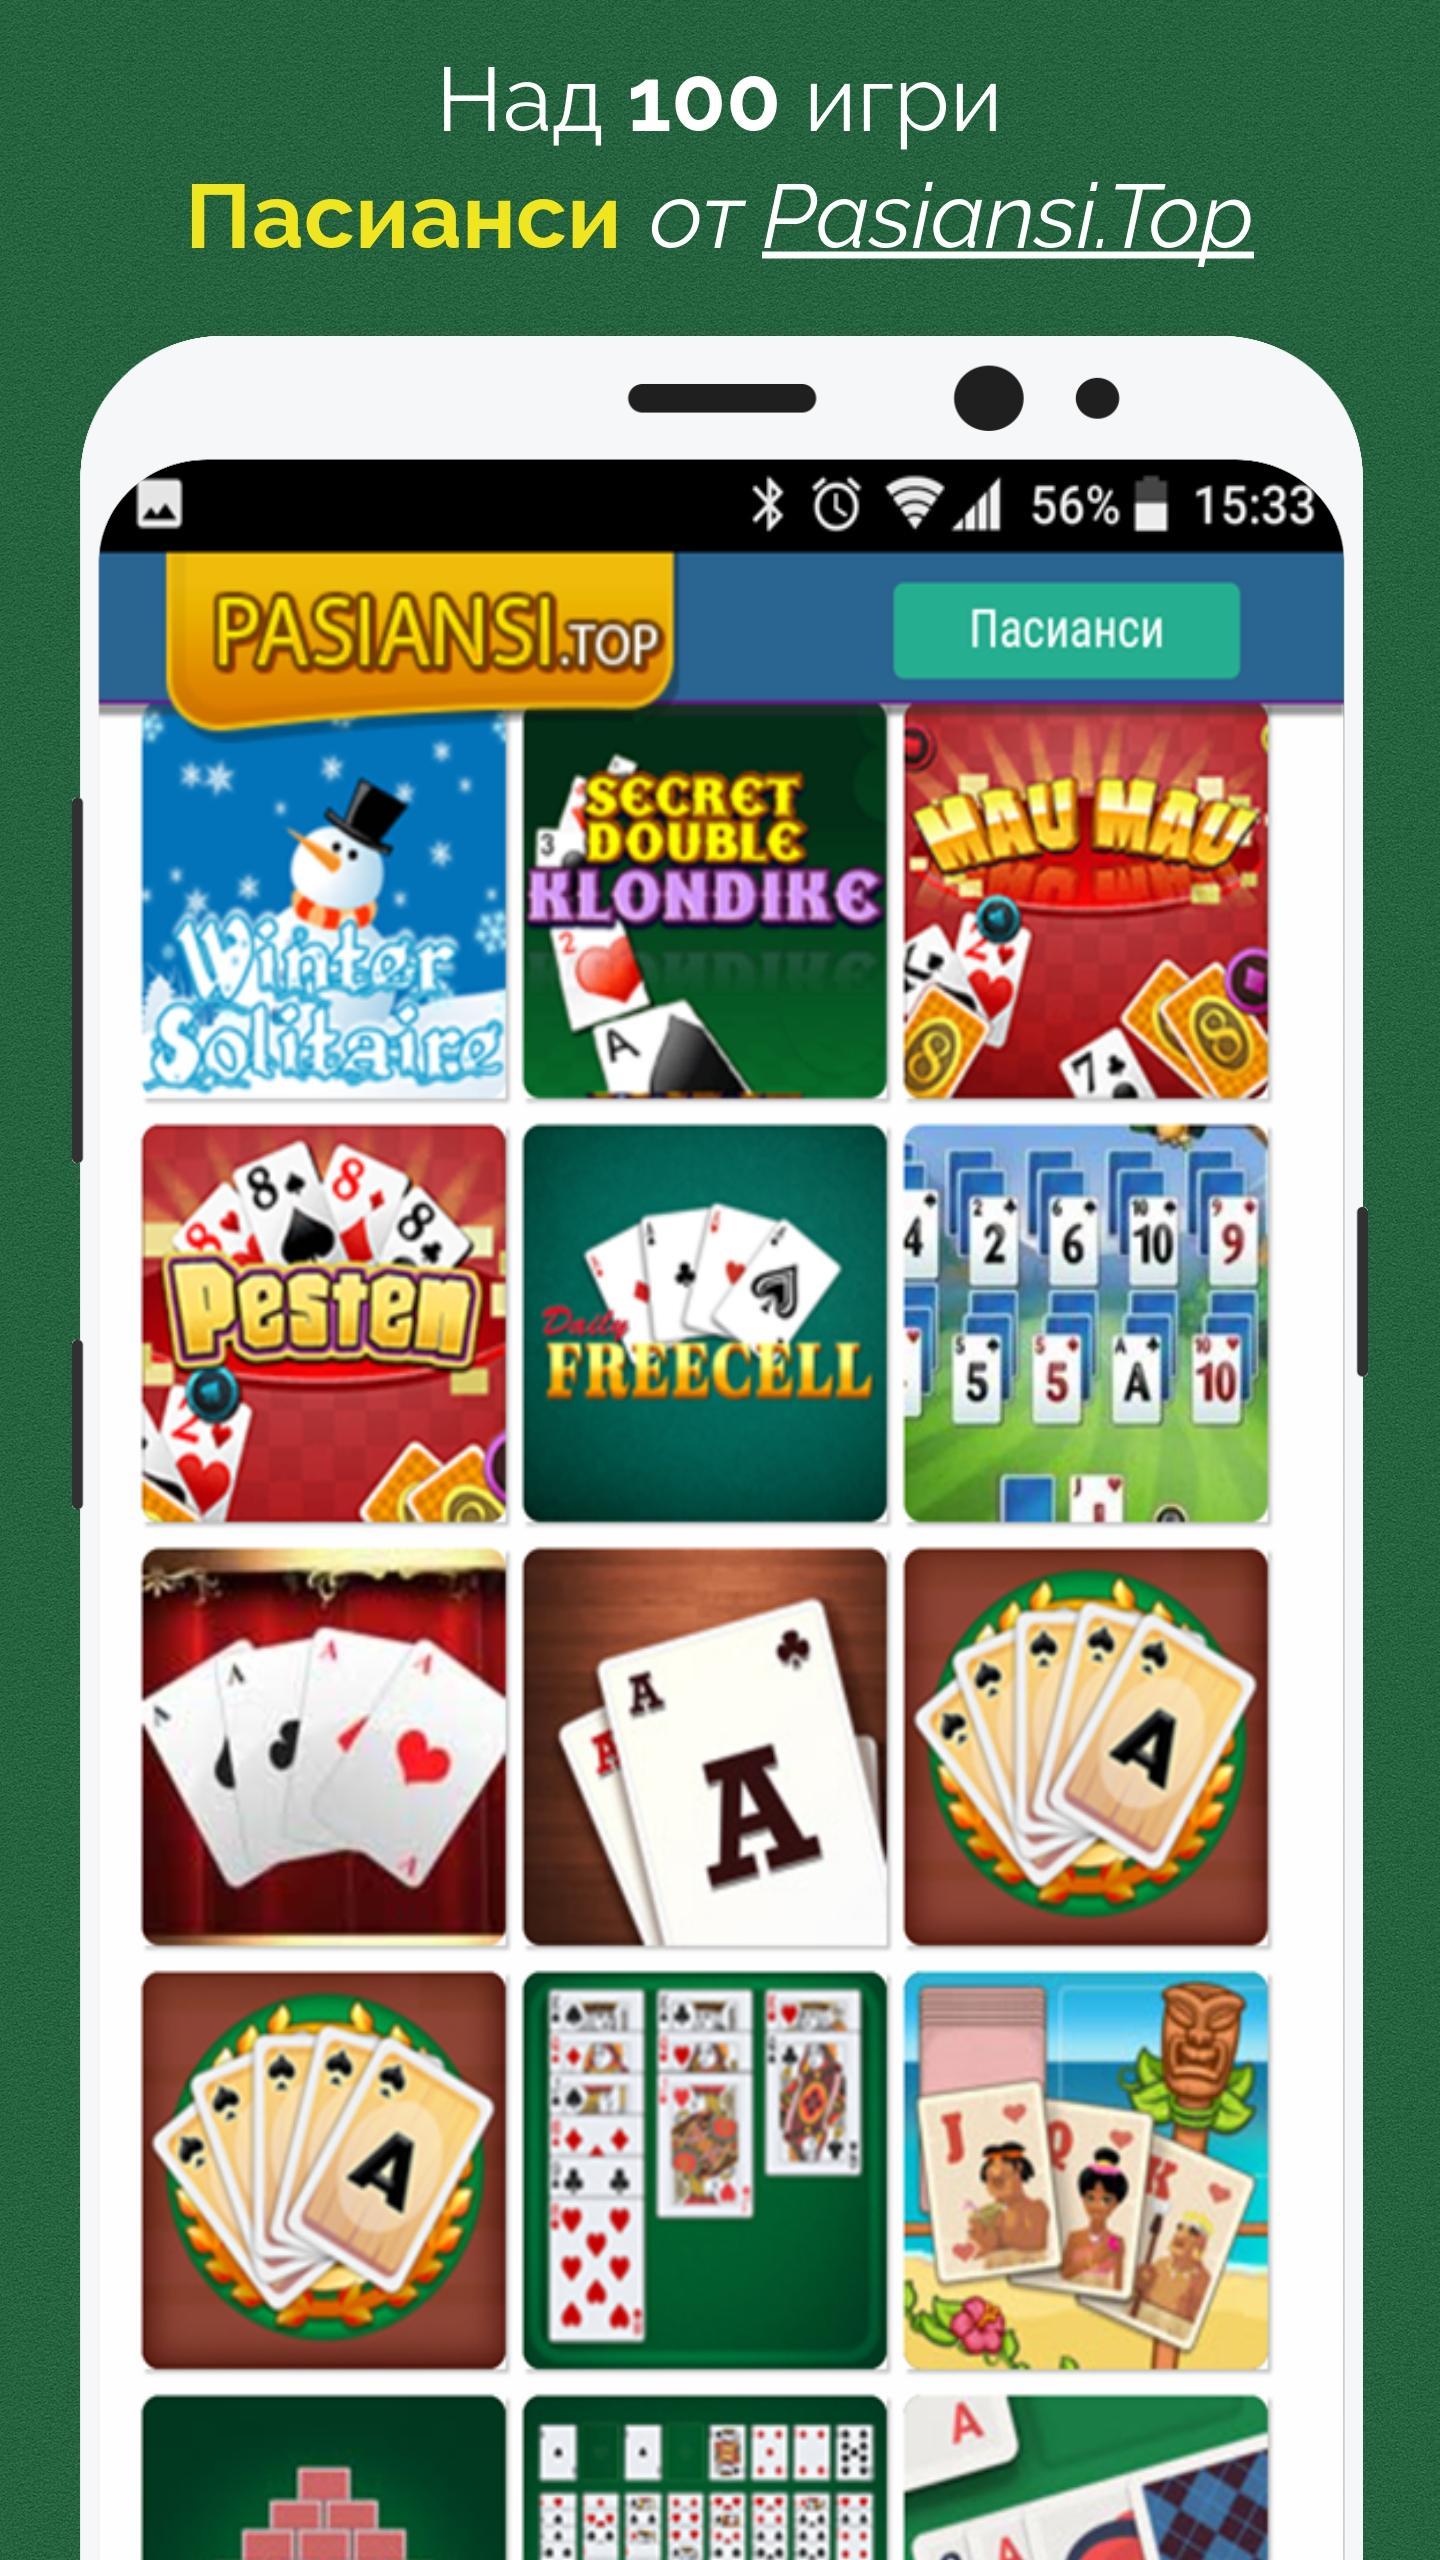 Pasiansi.top : Пасианси - Игри с Карти for Android - APK Download